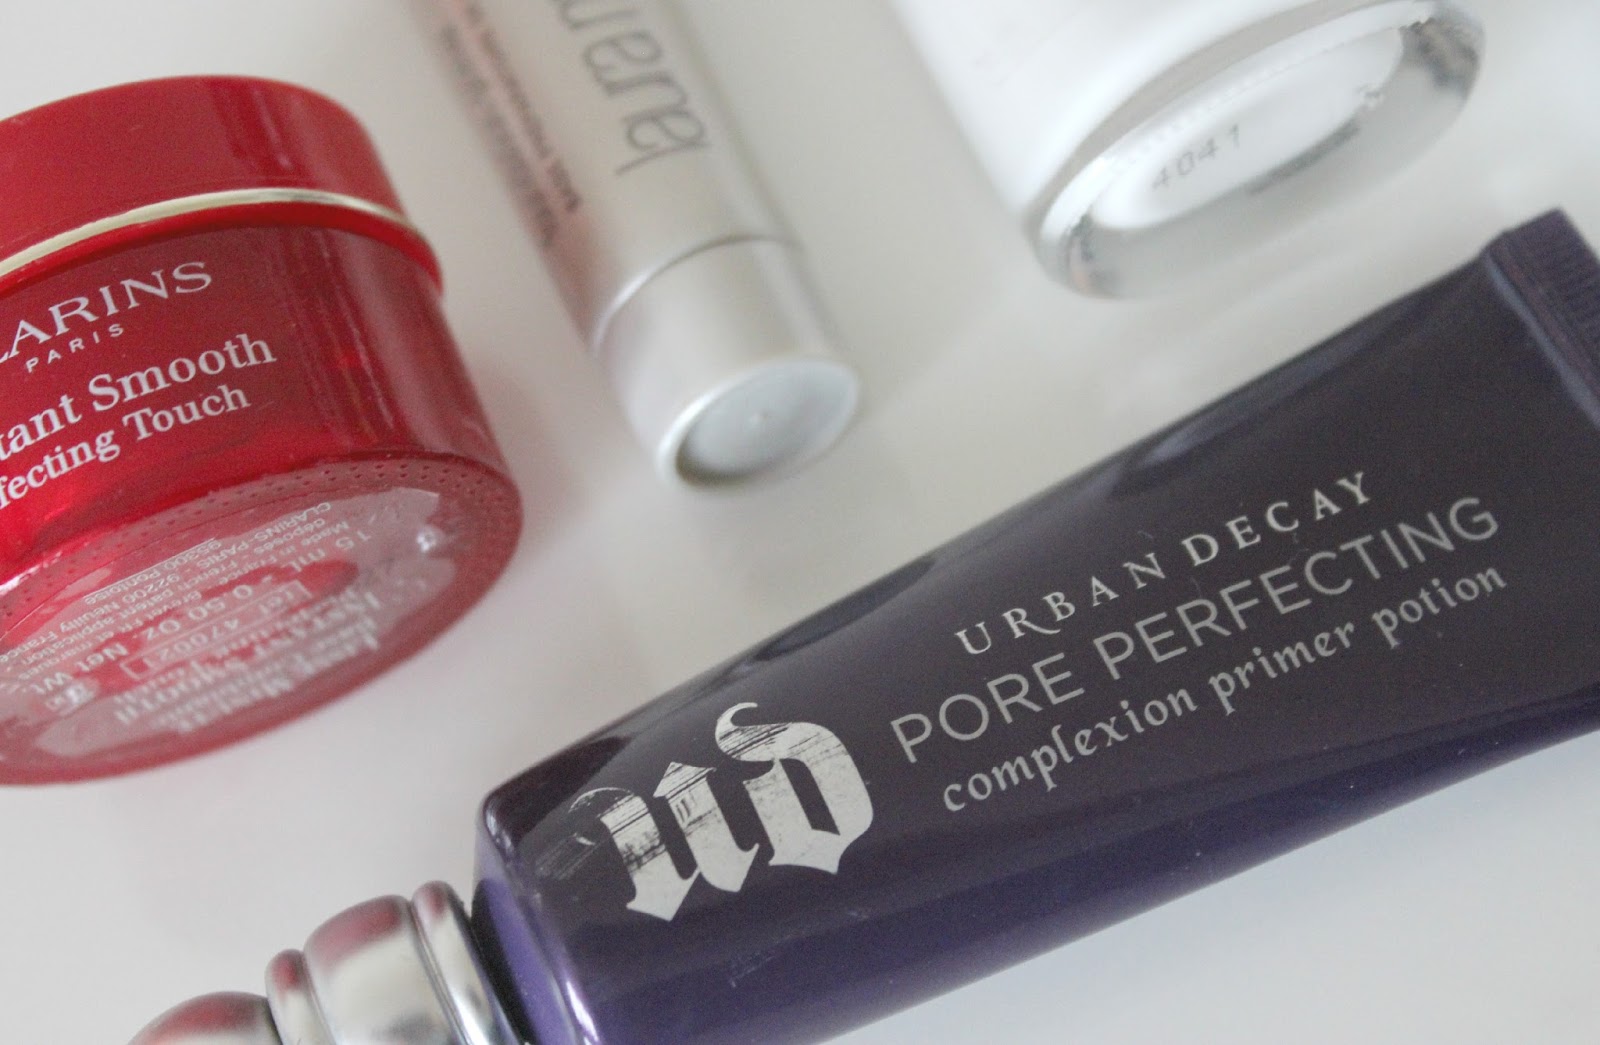 A picture of the Urban Decay Pore Perfecting Complexion Primer Potion